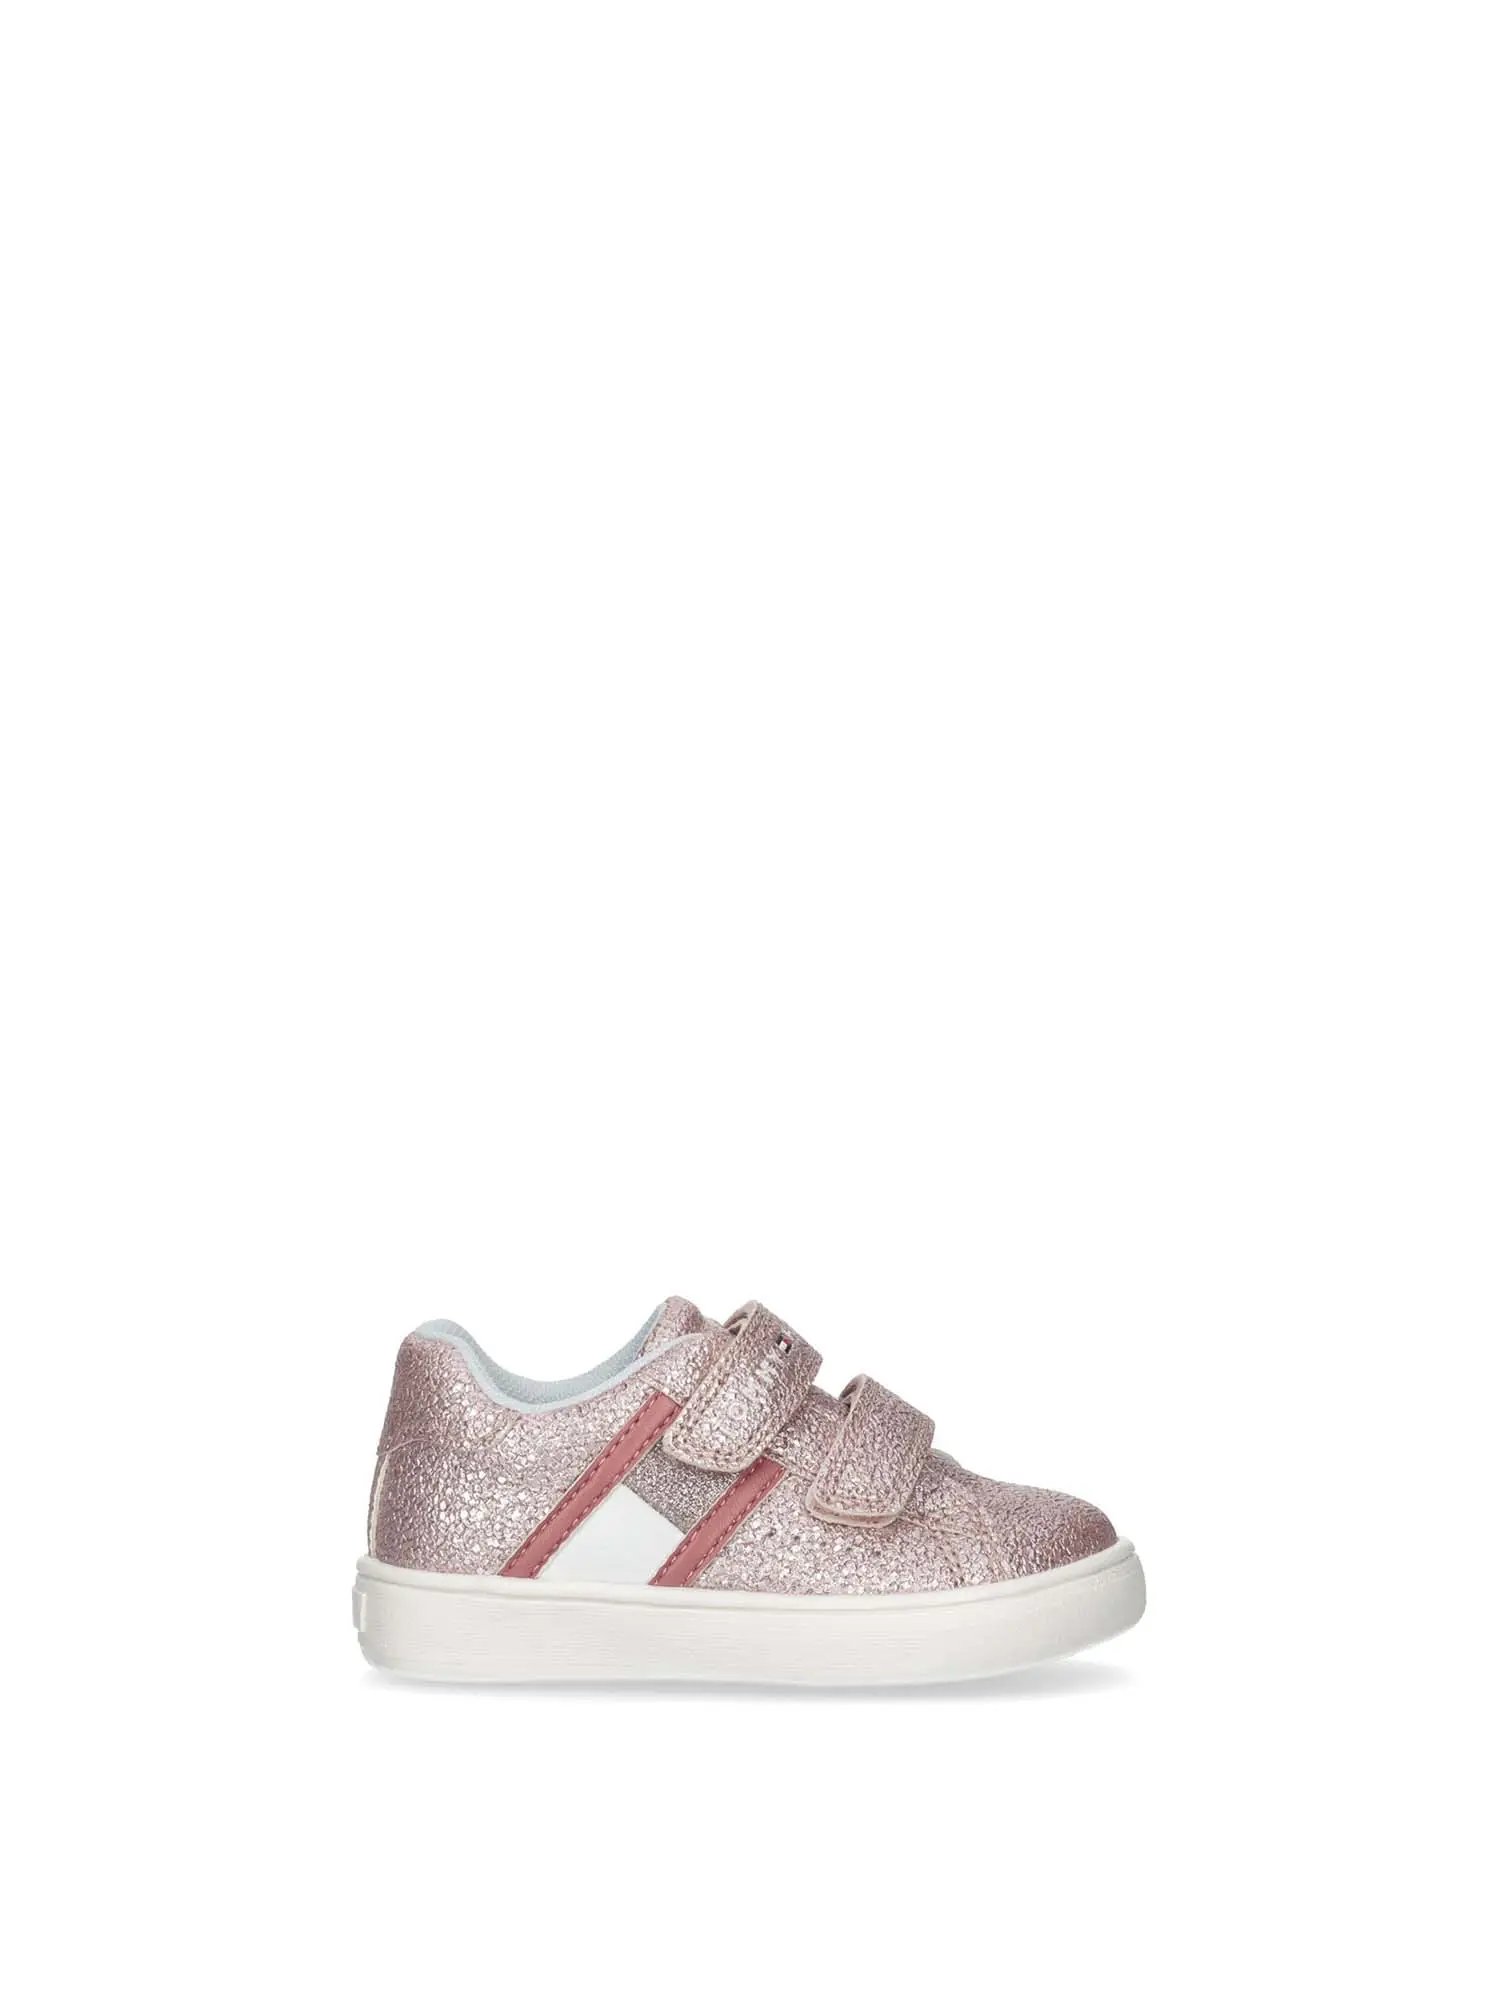 SNEAKERS BAMBINA - TOMMY HILFIGER - T1A9-33191-0375 - ROSA, 21